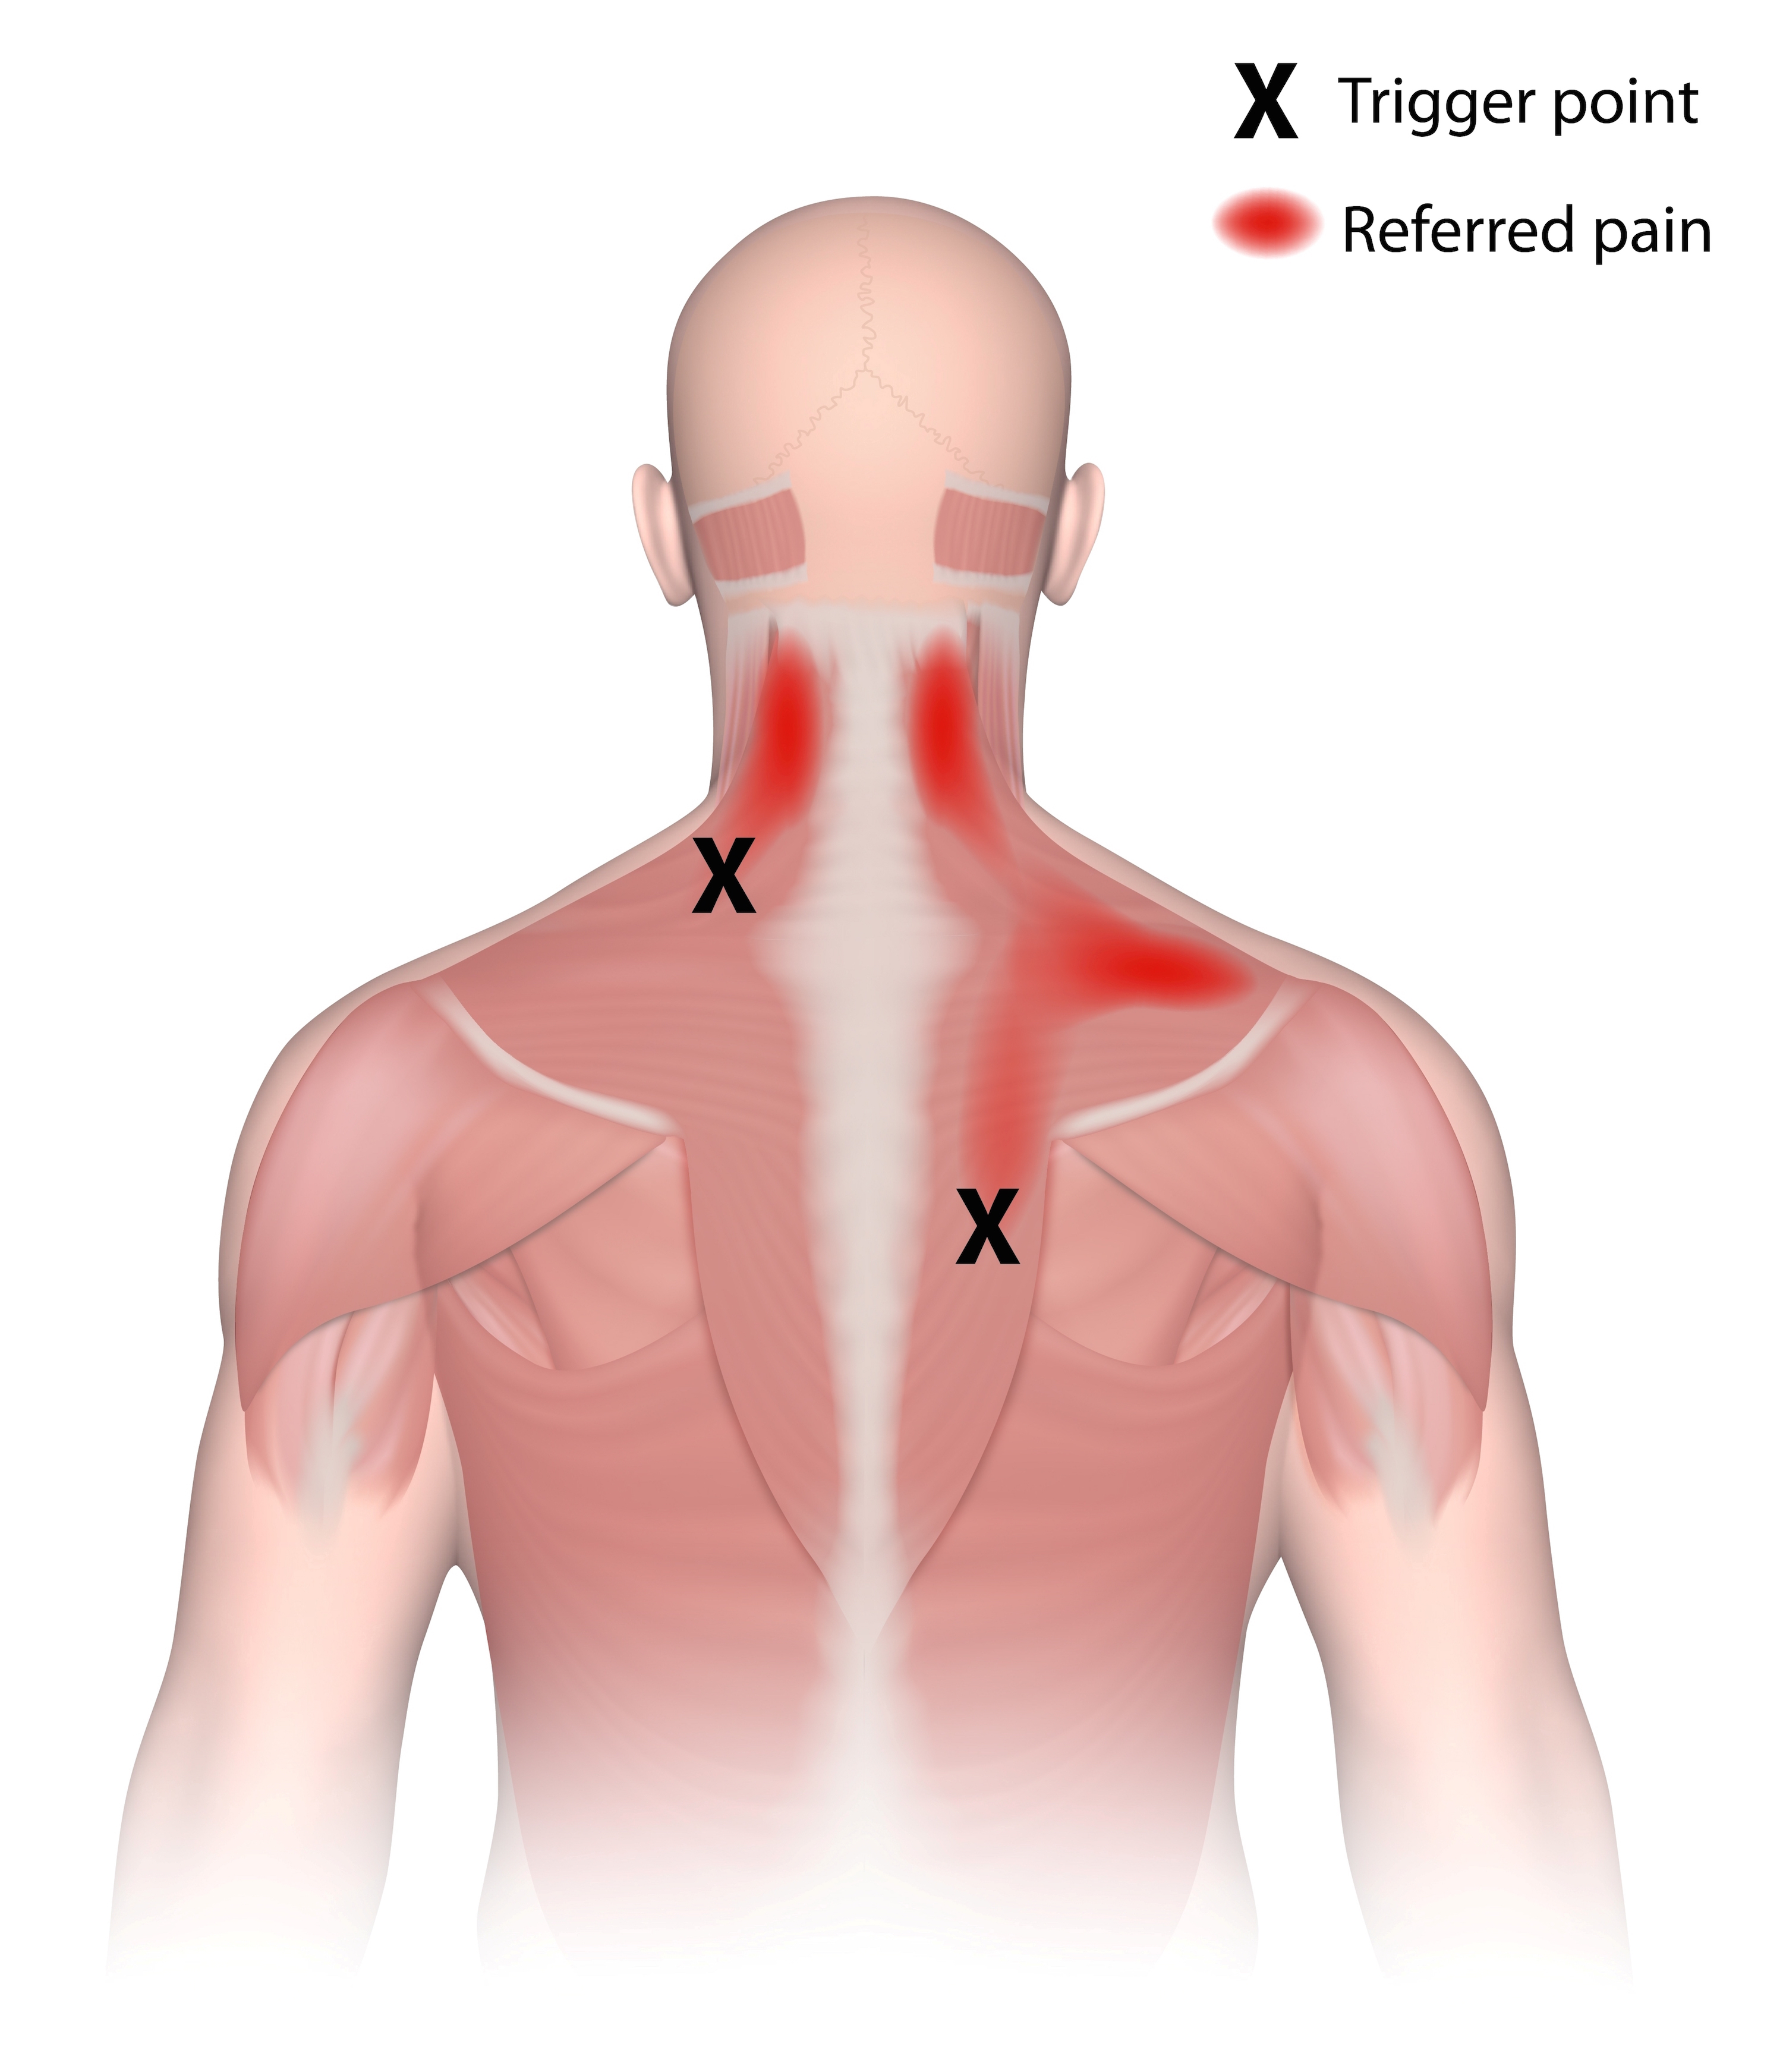 What Is A Trigger Point?